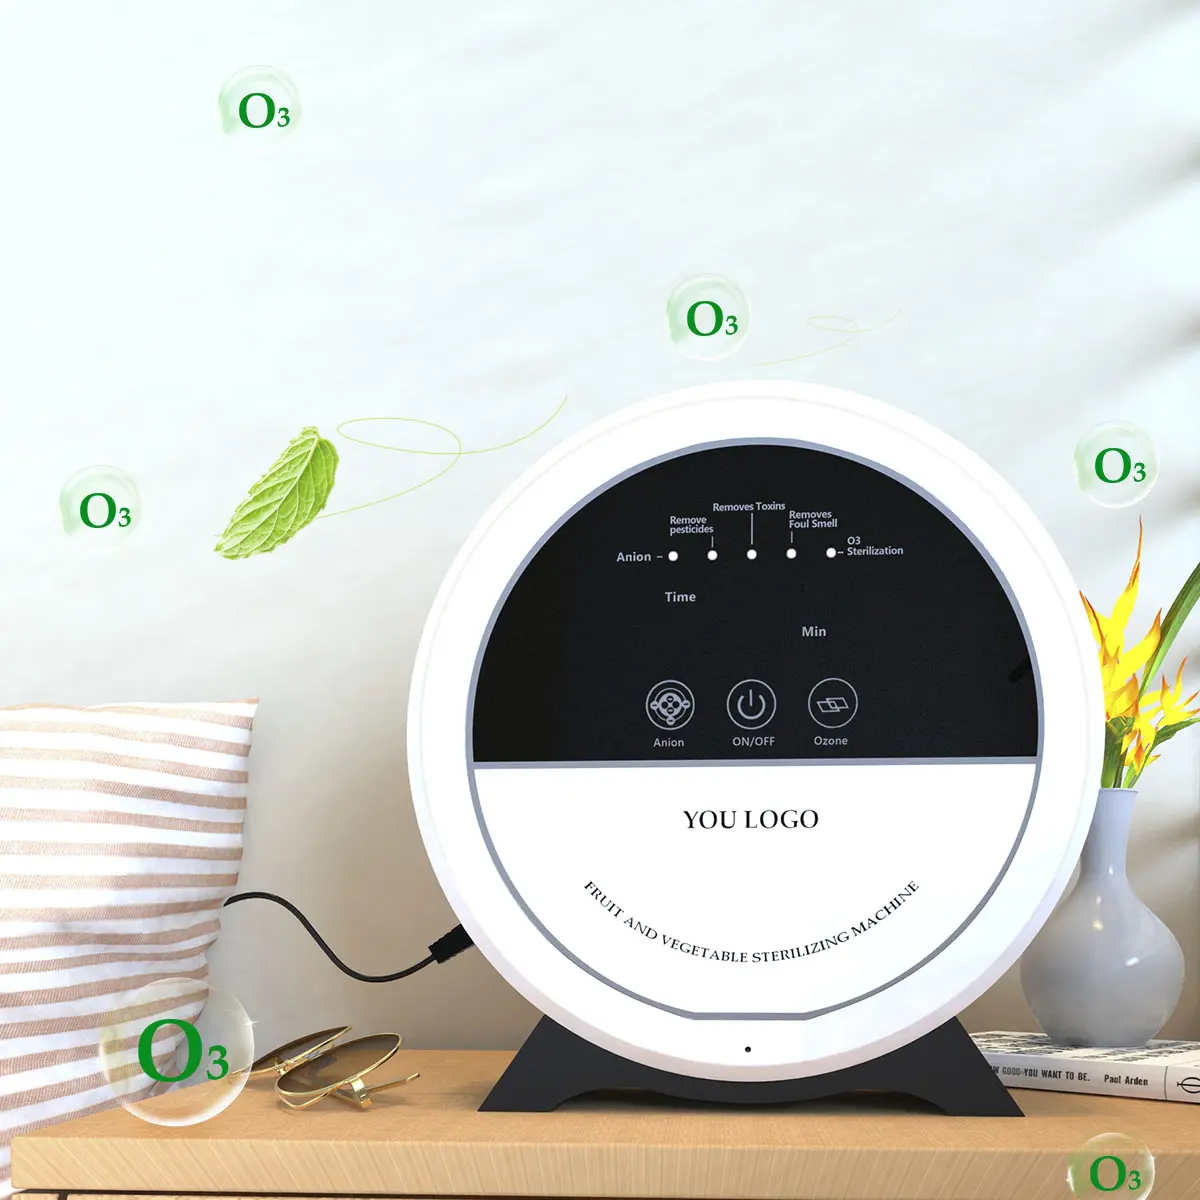 Professional Manufacturer Plant 300Mg 500Mg 600Mg Home Ozone Generator For Cleaning Vegetables Food House Room With Display